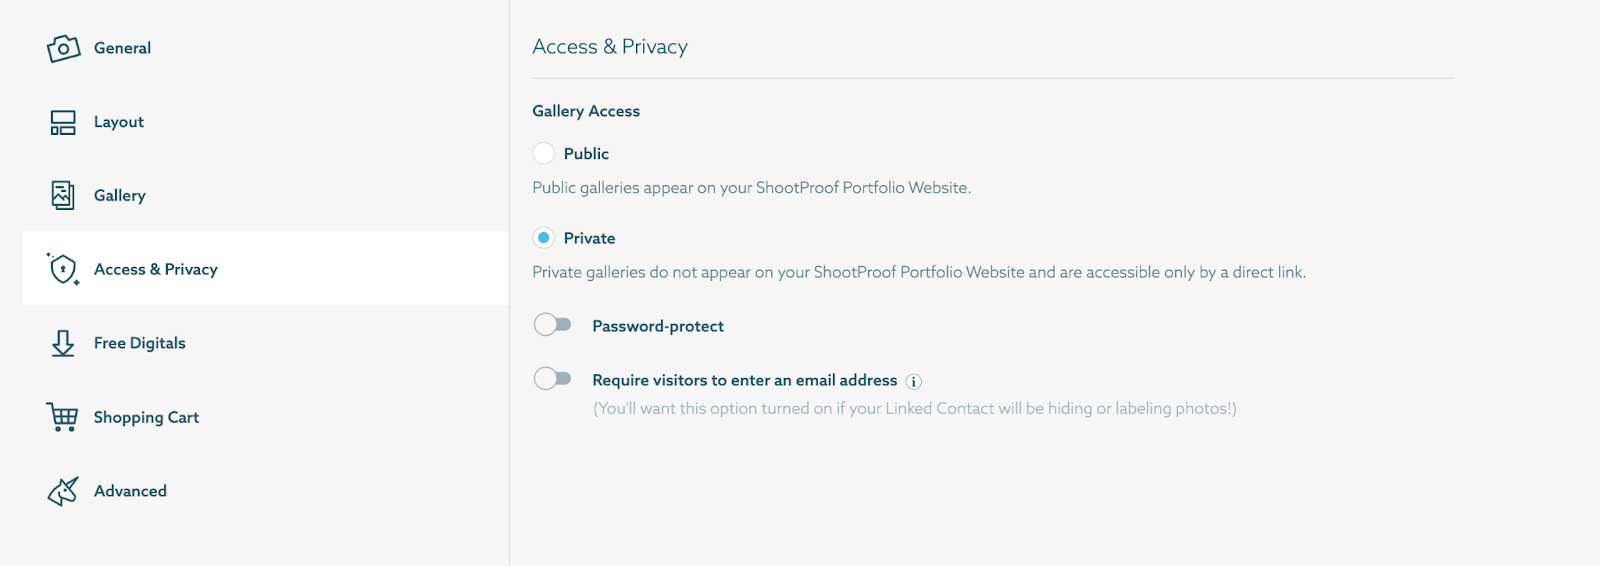 Access and privacy settings in ShootProof